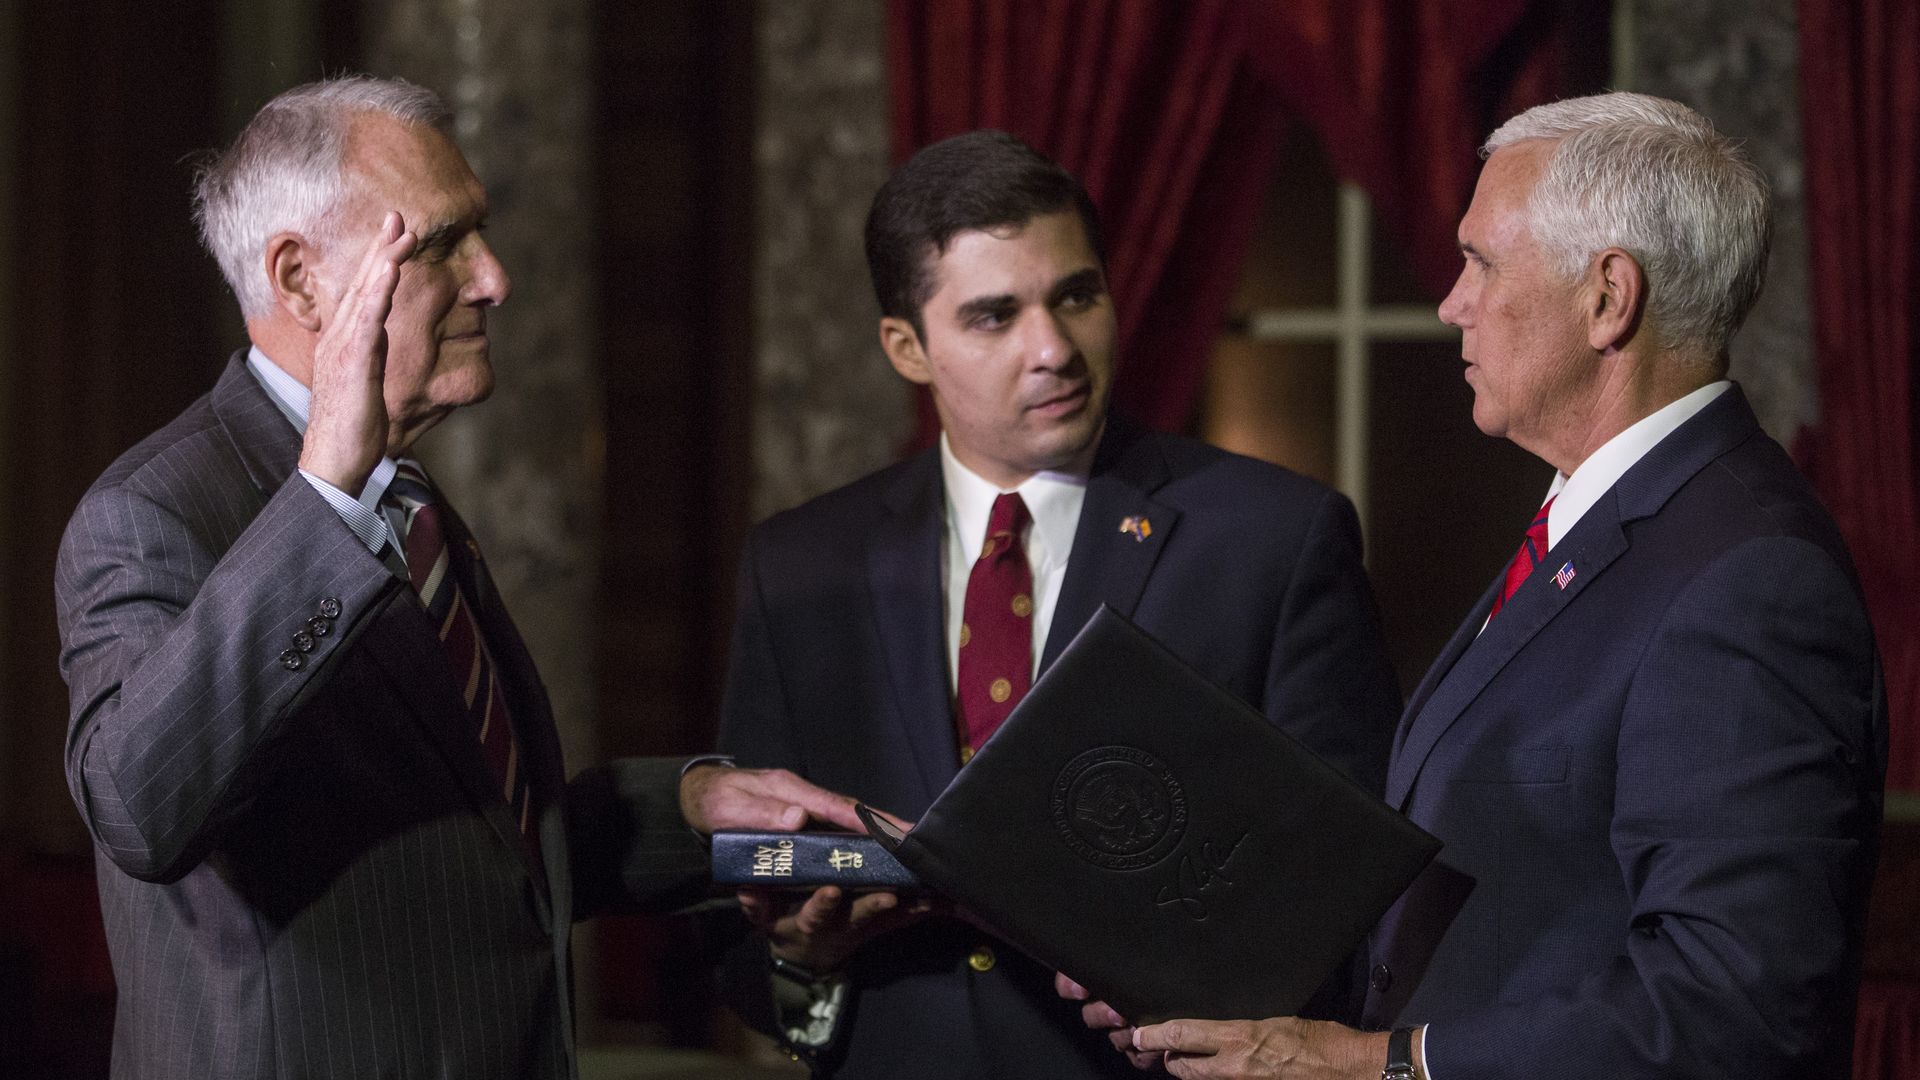 Sen. John Kyl being sworn into office by Mike Pence